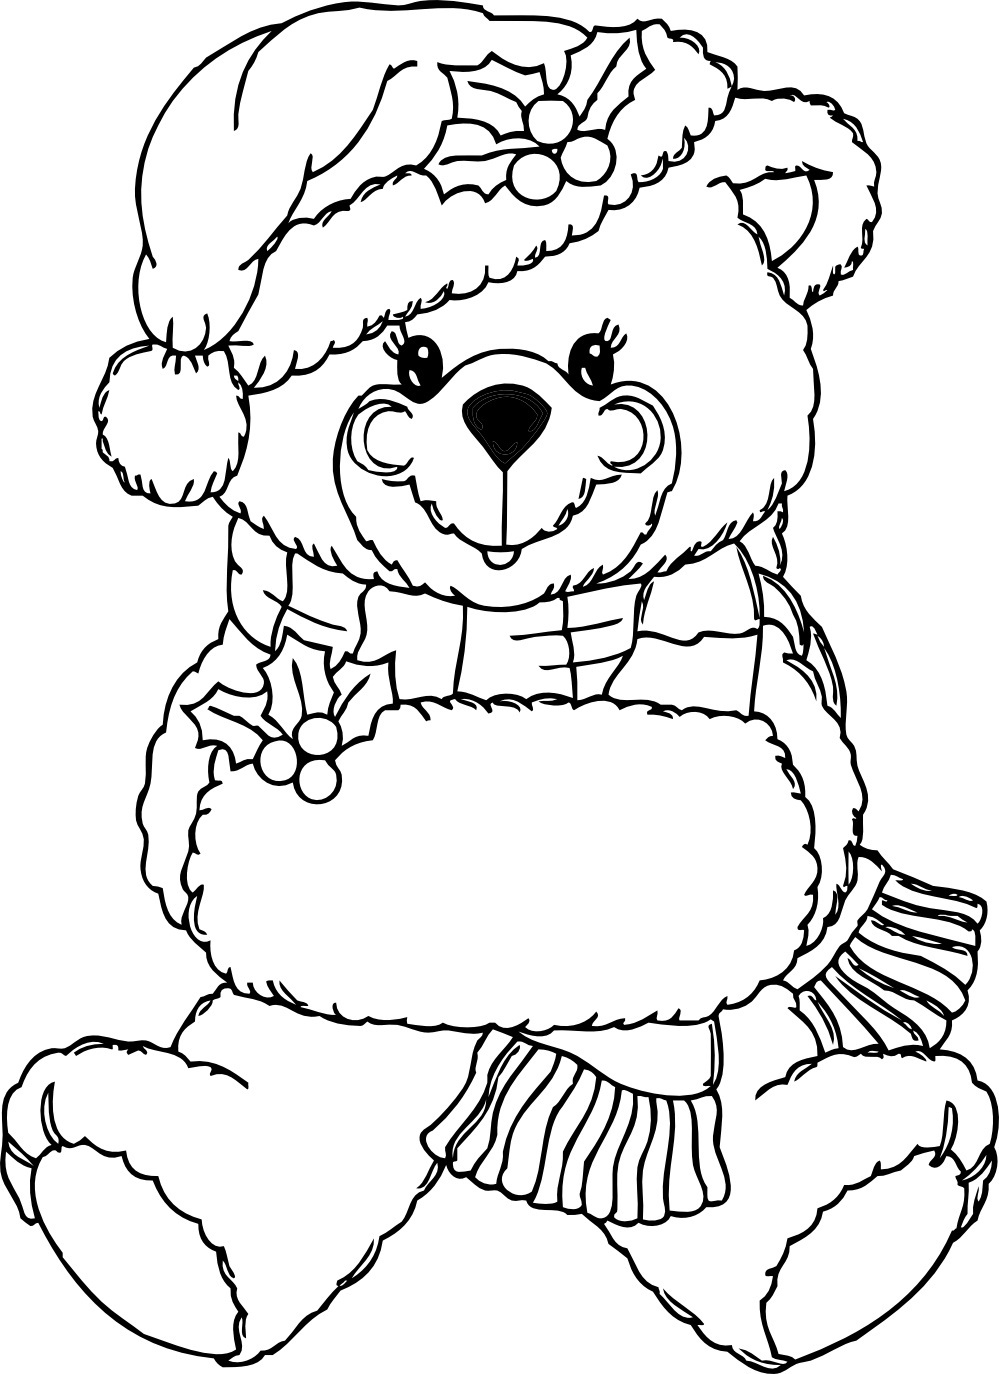 Free Printable Bear Pictures To Color